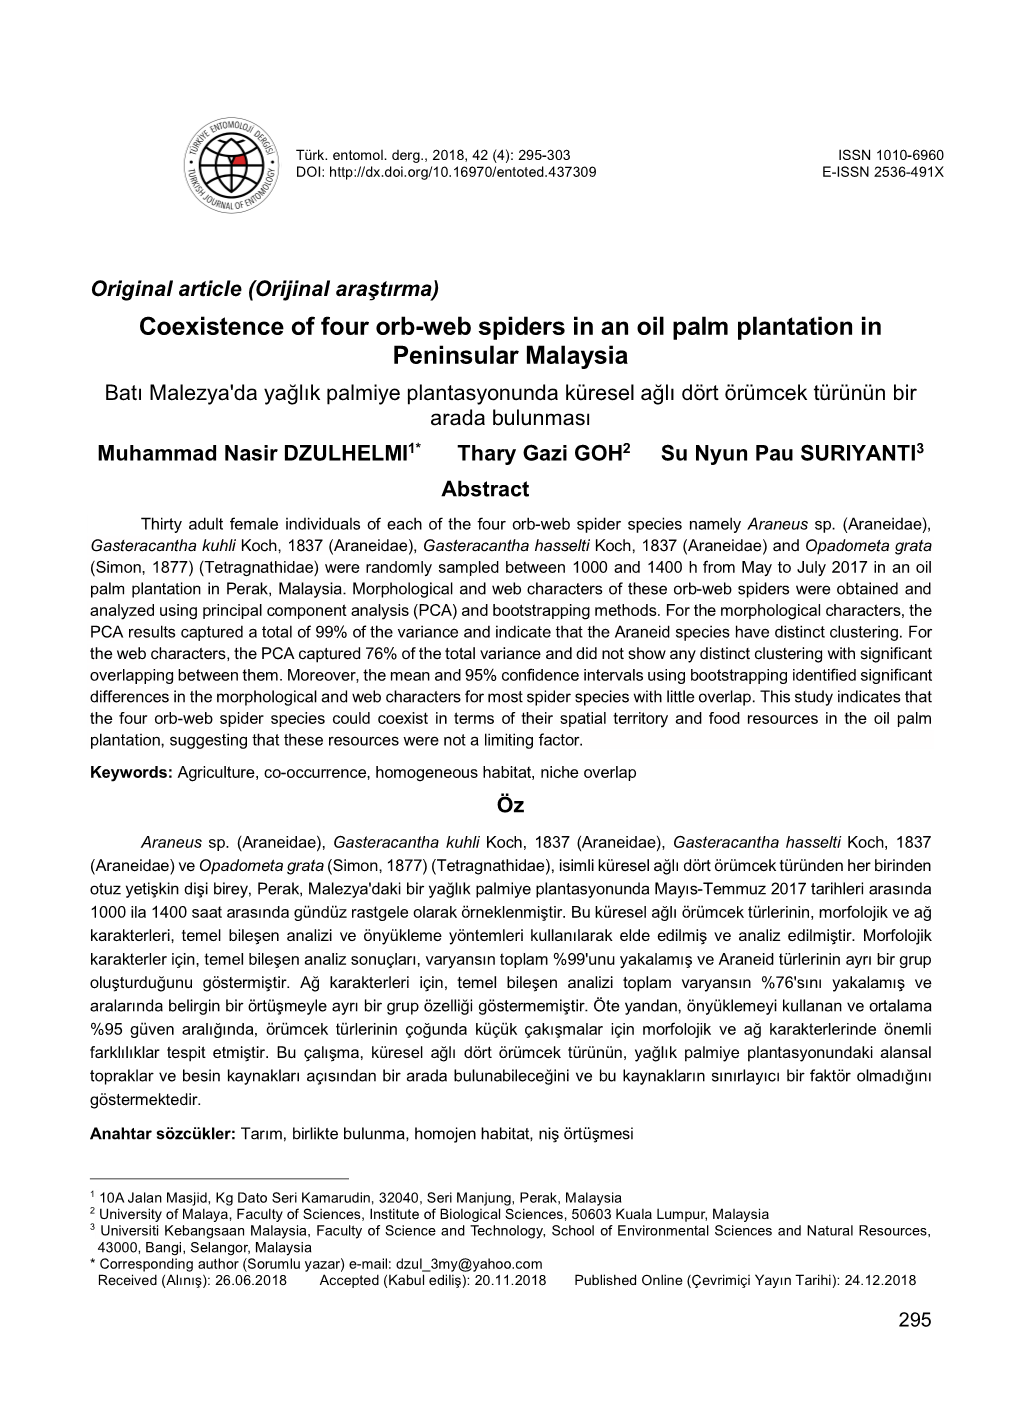 Coexistence of Four Orb-Web Spiders in an Oil Palm Plantation In